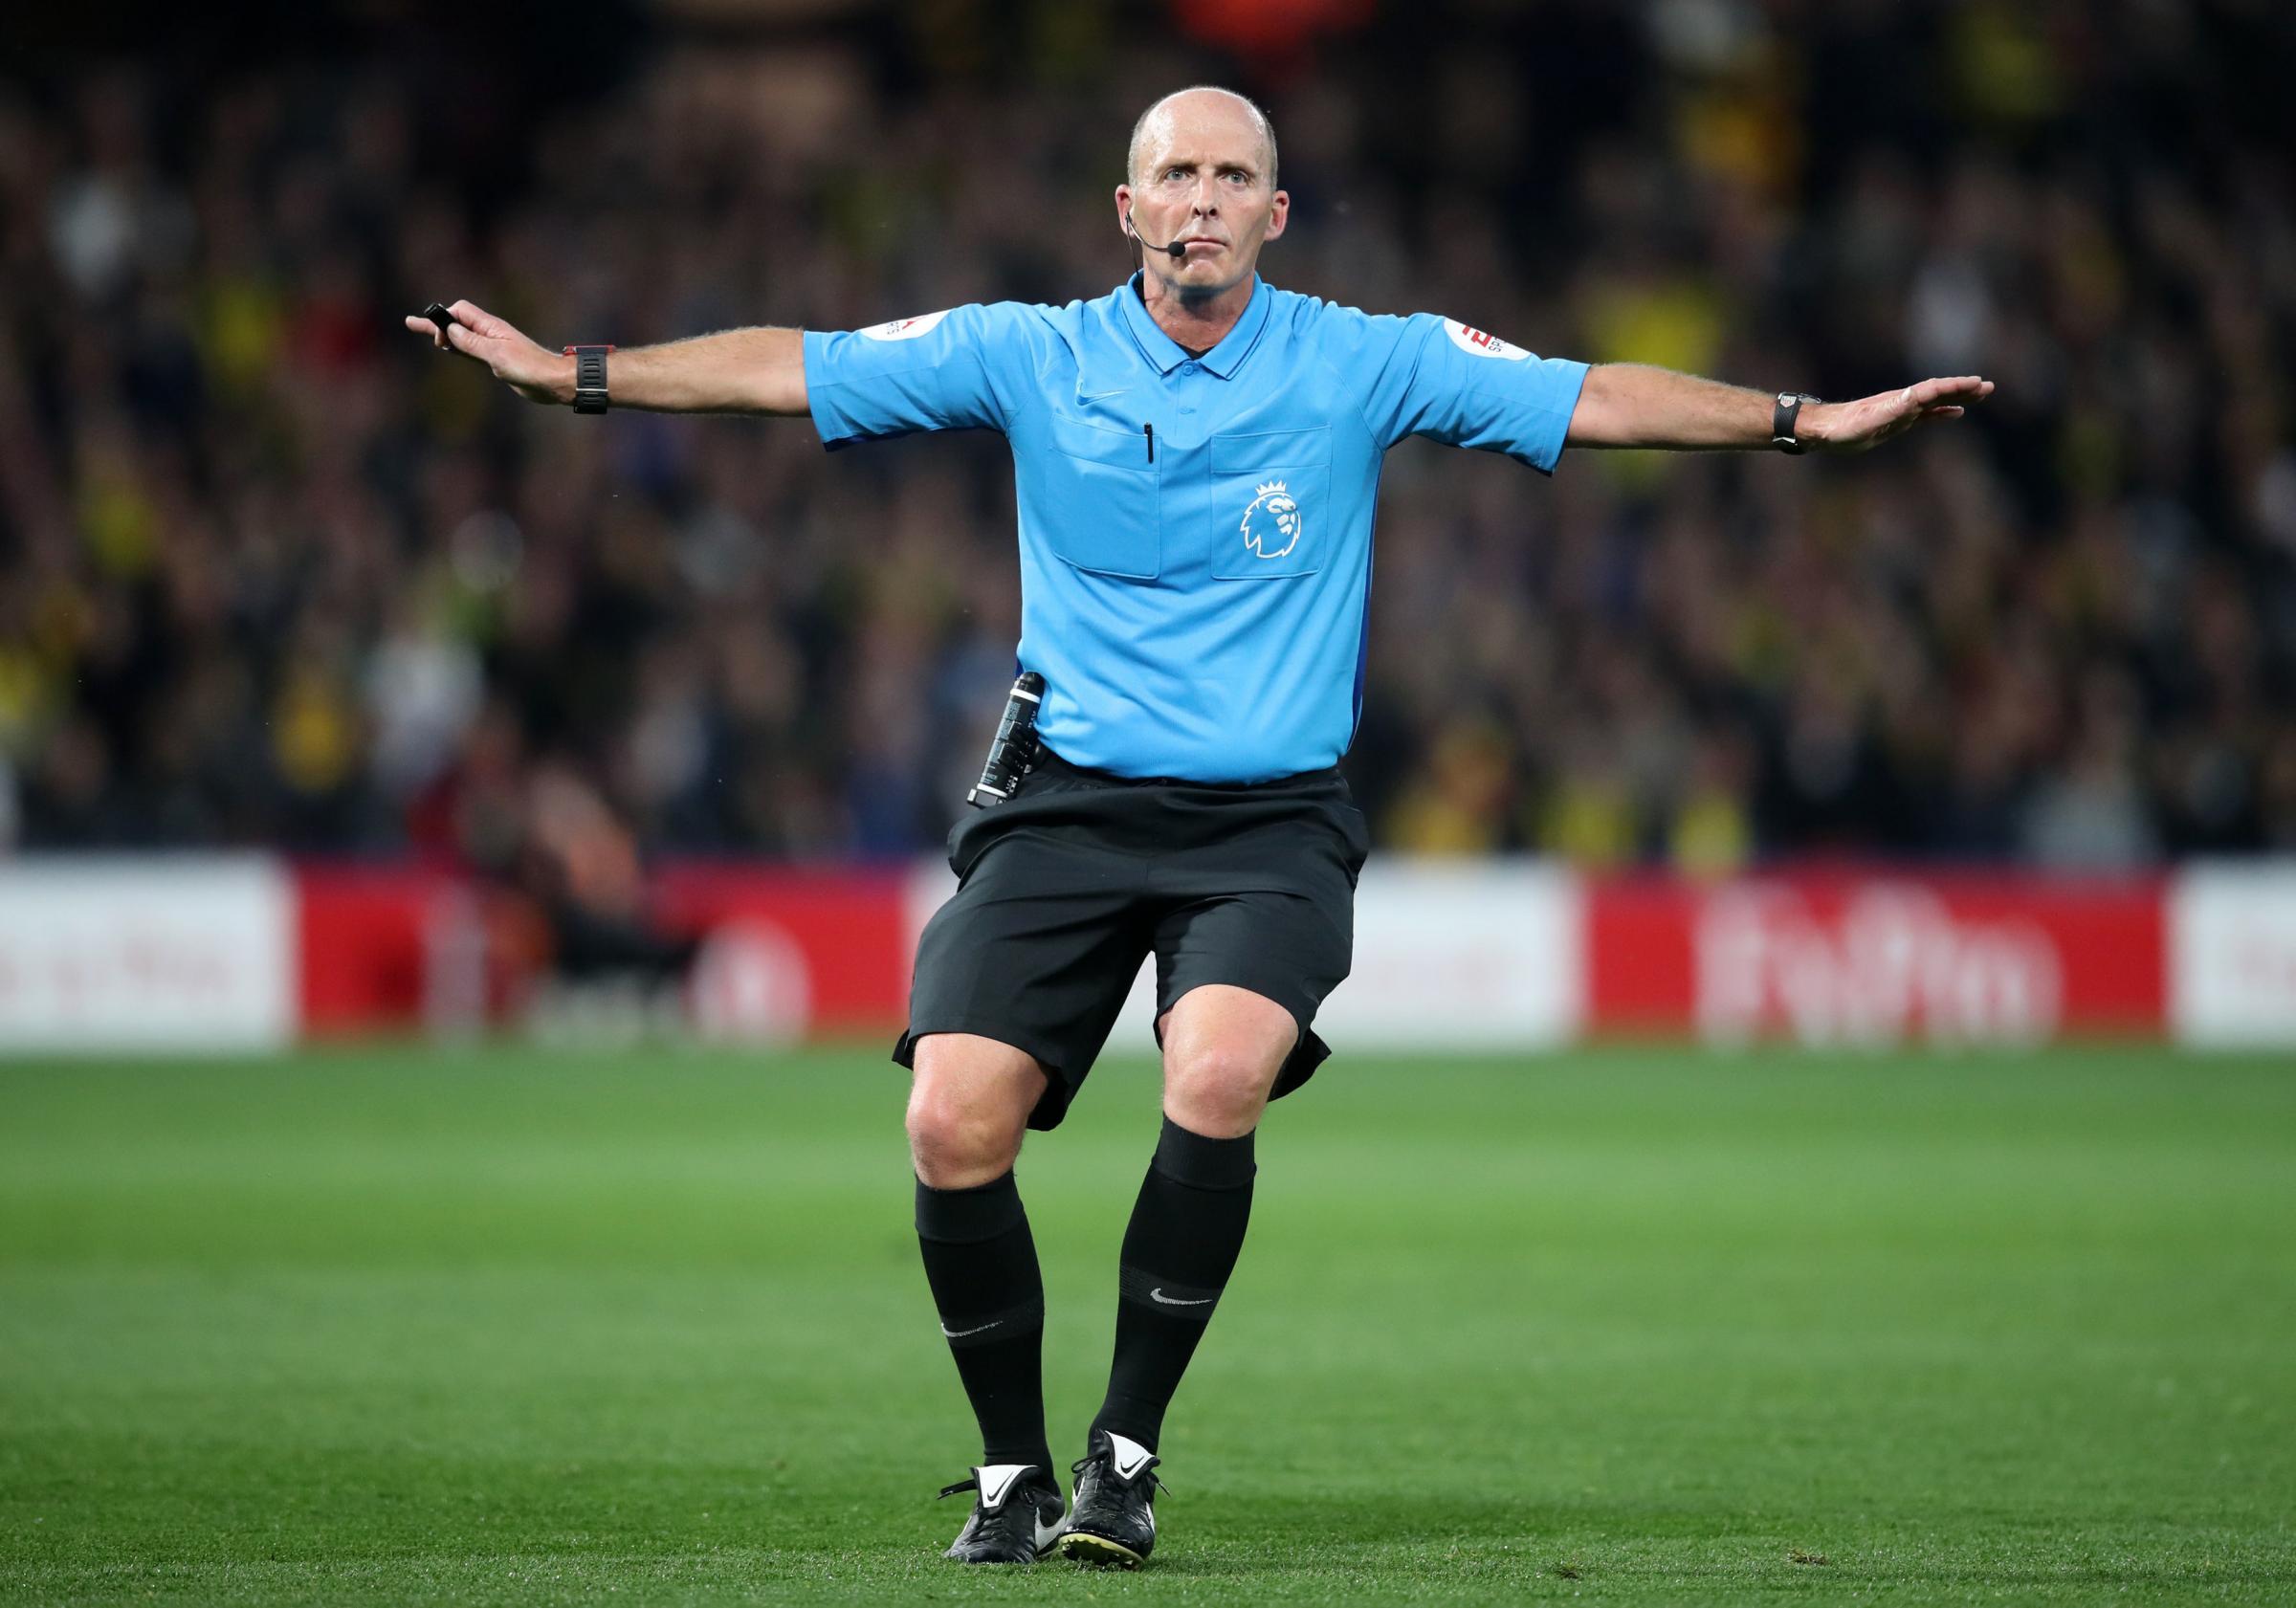 Referee Dean receives death threats after red card calls